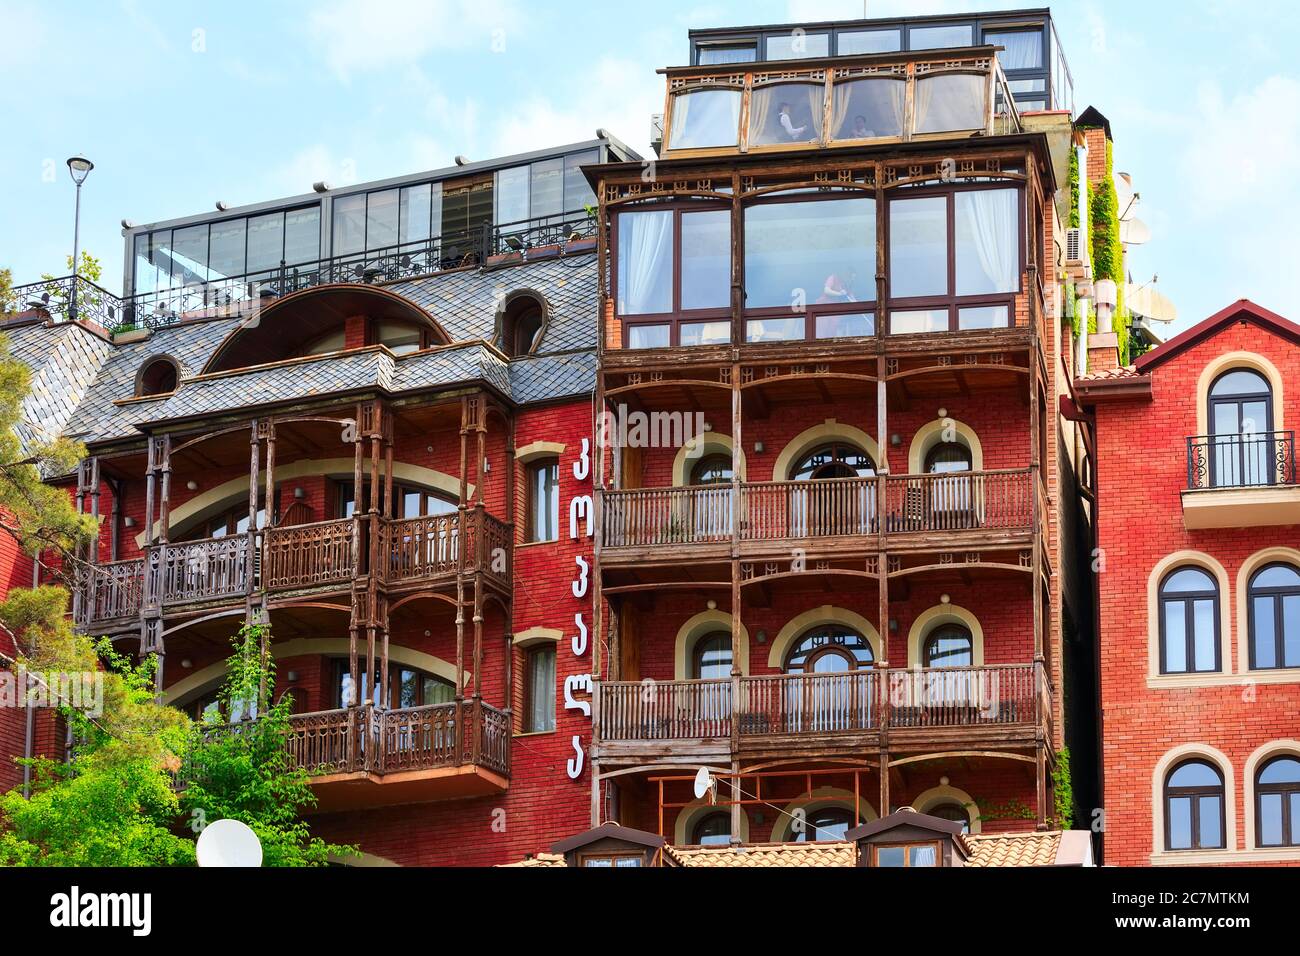 Tbilisi, Georgia - April 29, 2017: Traditional house with wooden carving balcony in Old Town Stock Photo